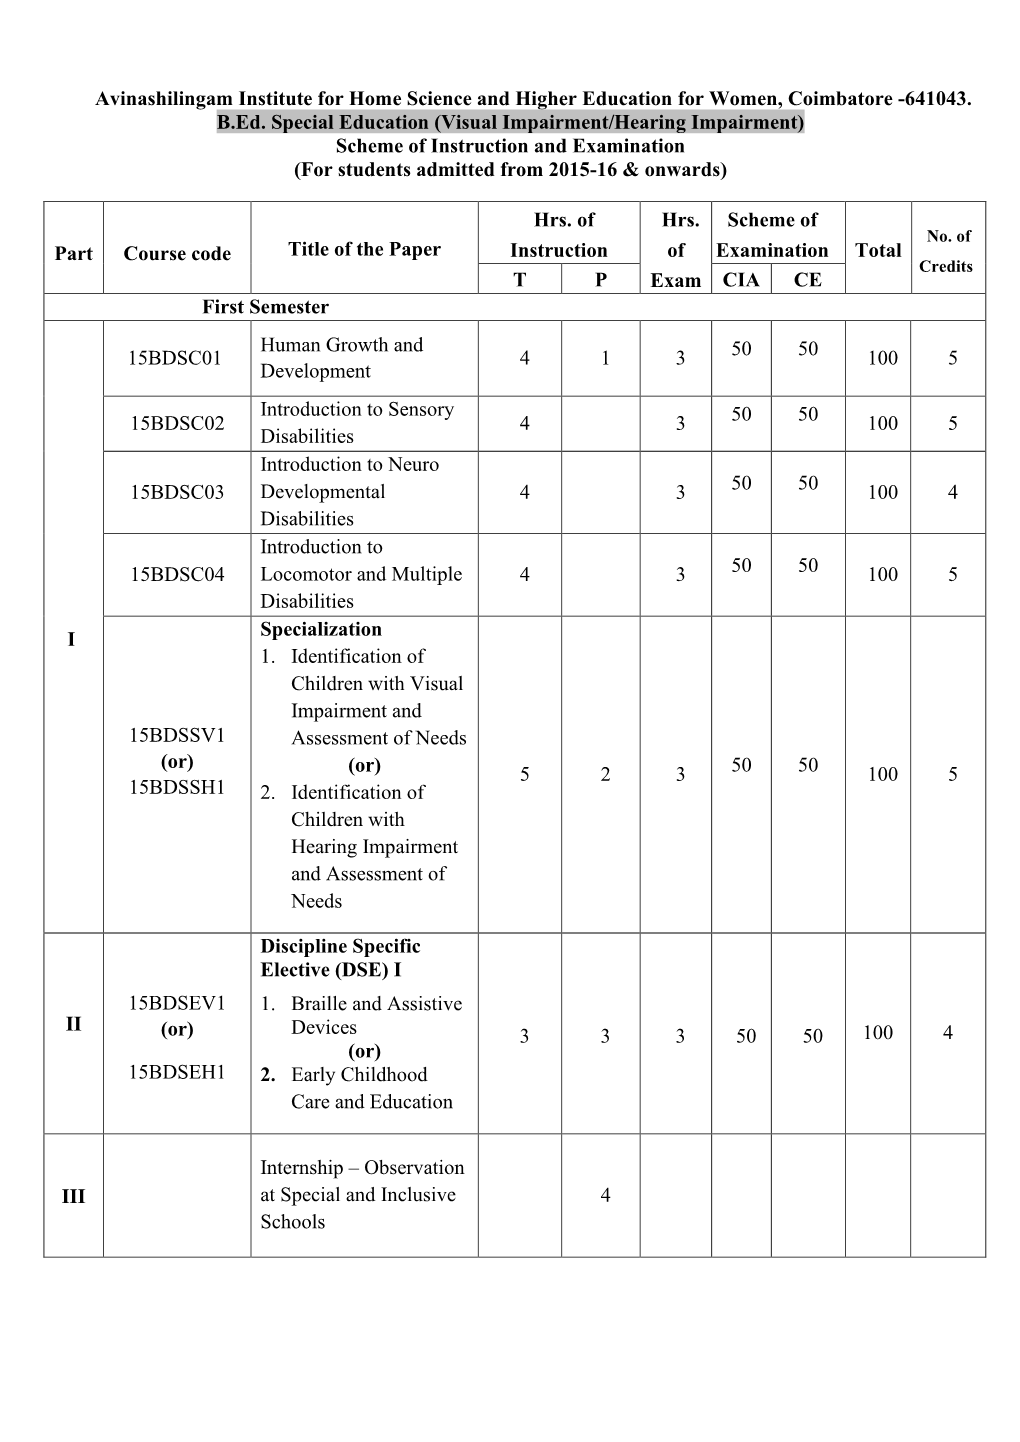 641043. B.Ed. Special Education (Visual Impairment/Hearing Impairment) Scheme of Instruction and Examination (For Students Admitted from 2015-16 & Onwards)